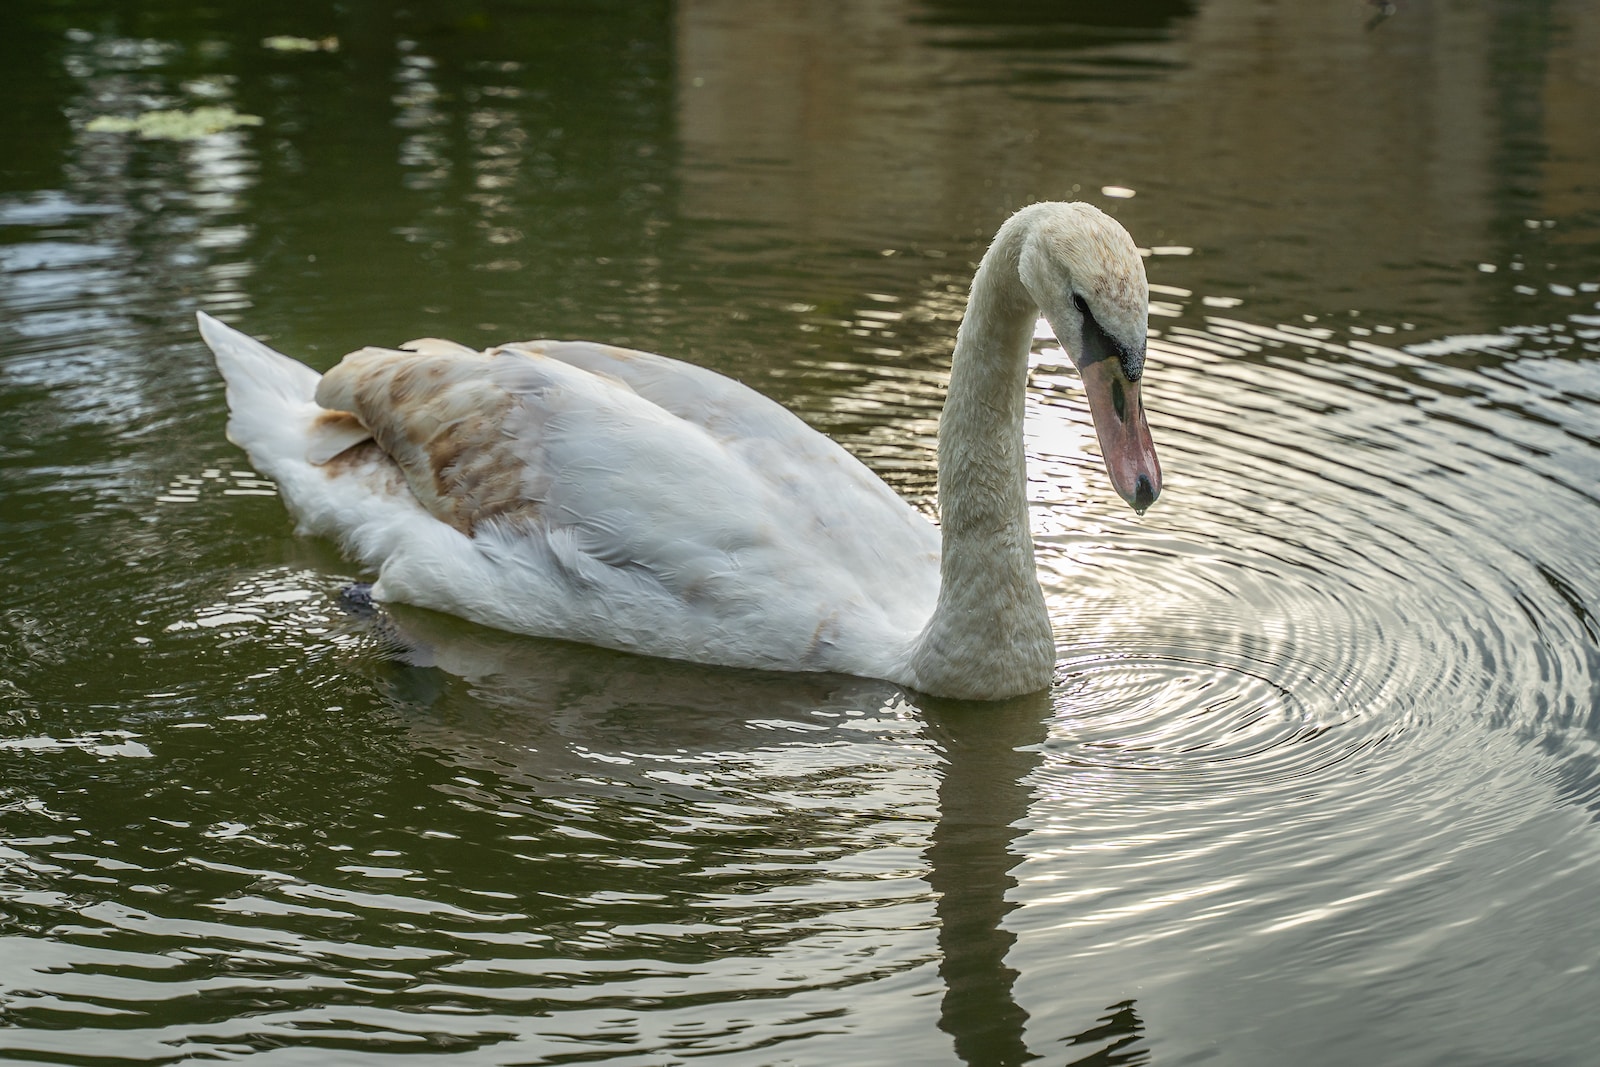 a swan is swimming in the water with its head under the water's surface